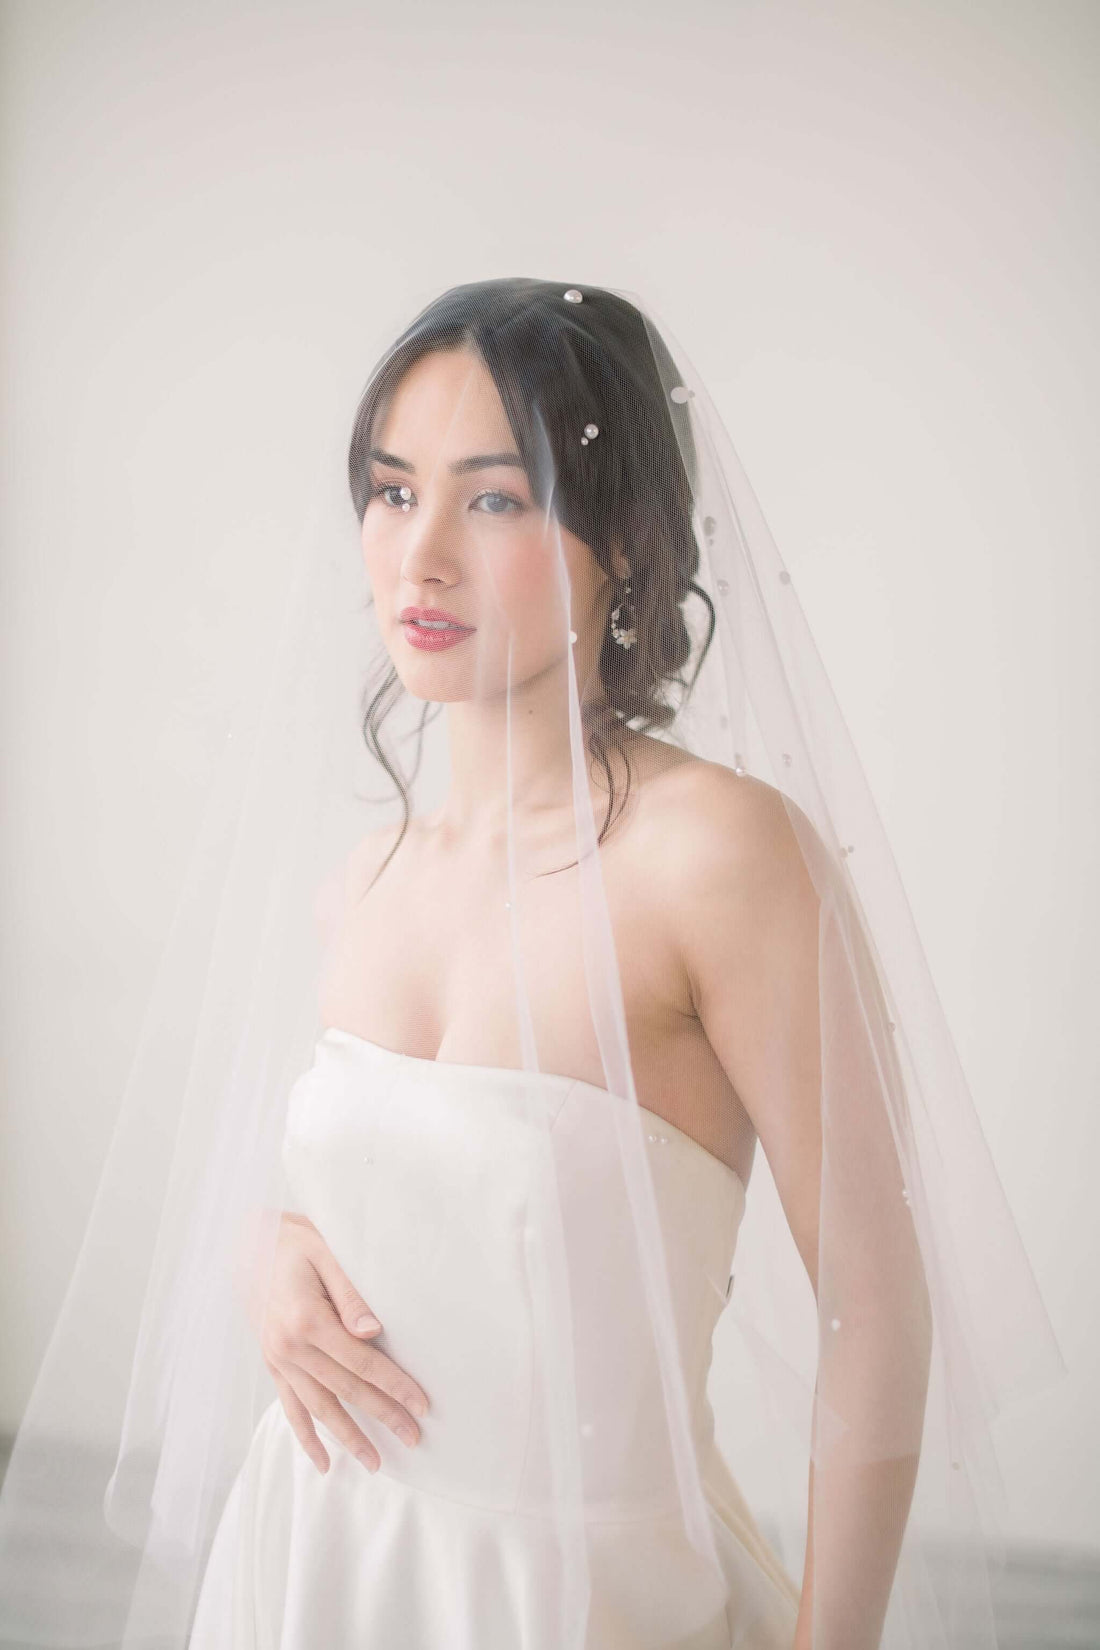 What is a blusher bridal wedding veil and do I need one? Tessa Kim